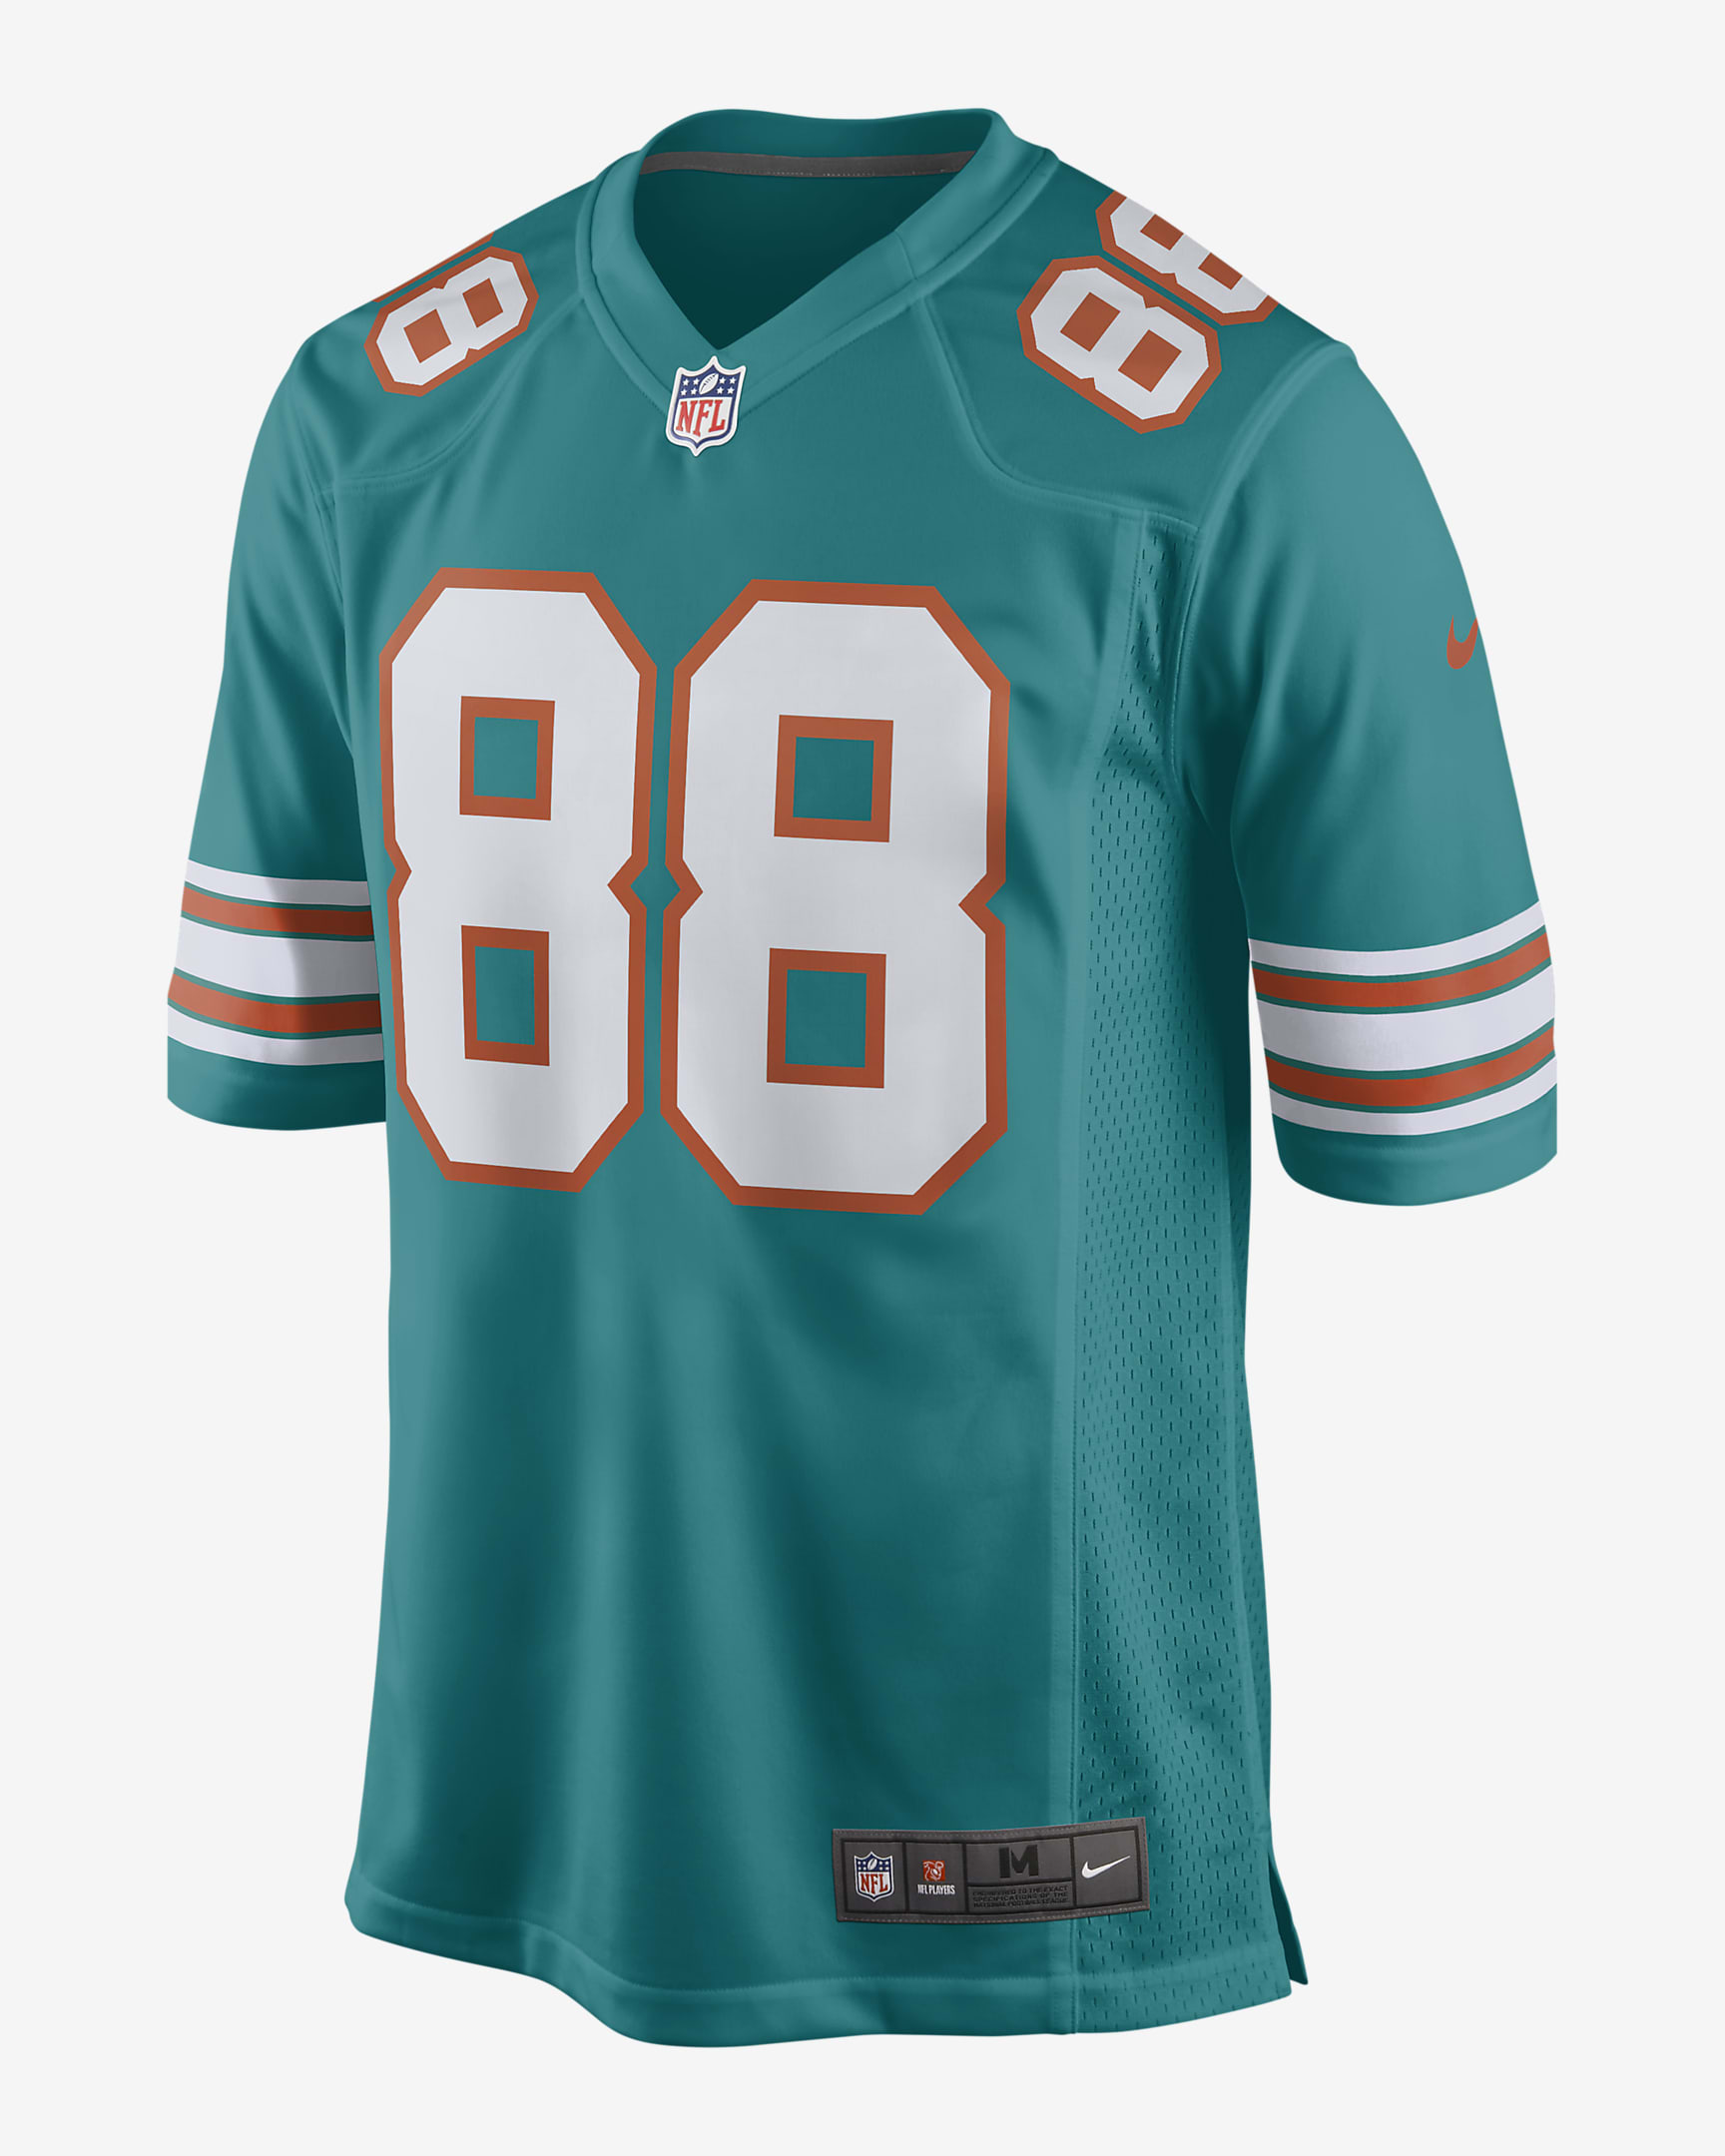 NFL Miami Dolphins (Mike Gesicki) Men's Game Football Jersey. Nike.com